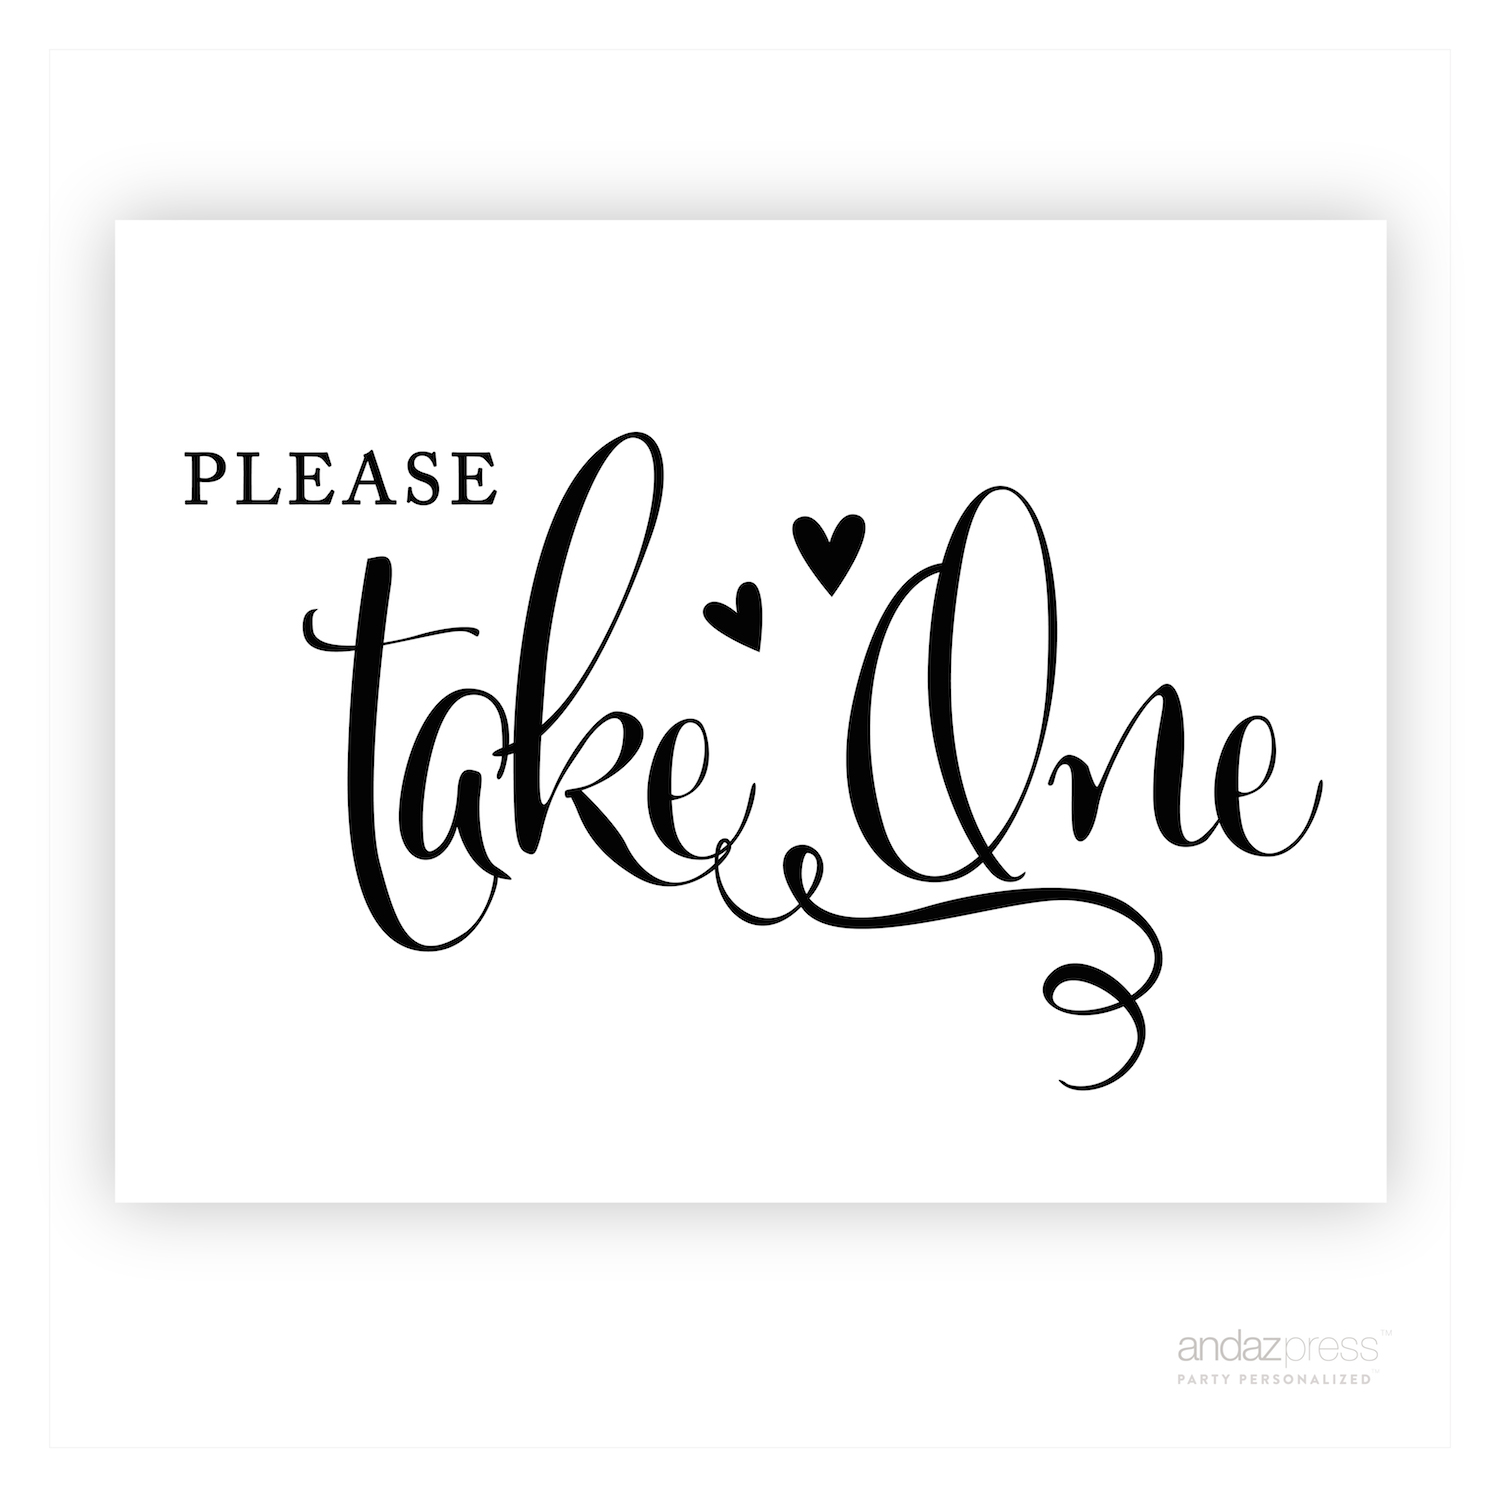 ap10251 andaz press wedding party signs formal black and white 8 5 inch x 11 inch please take one1